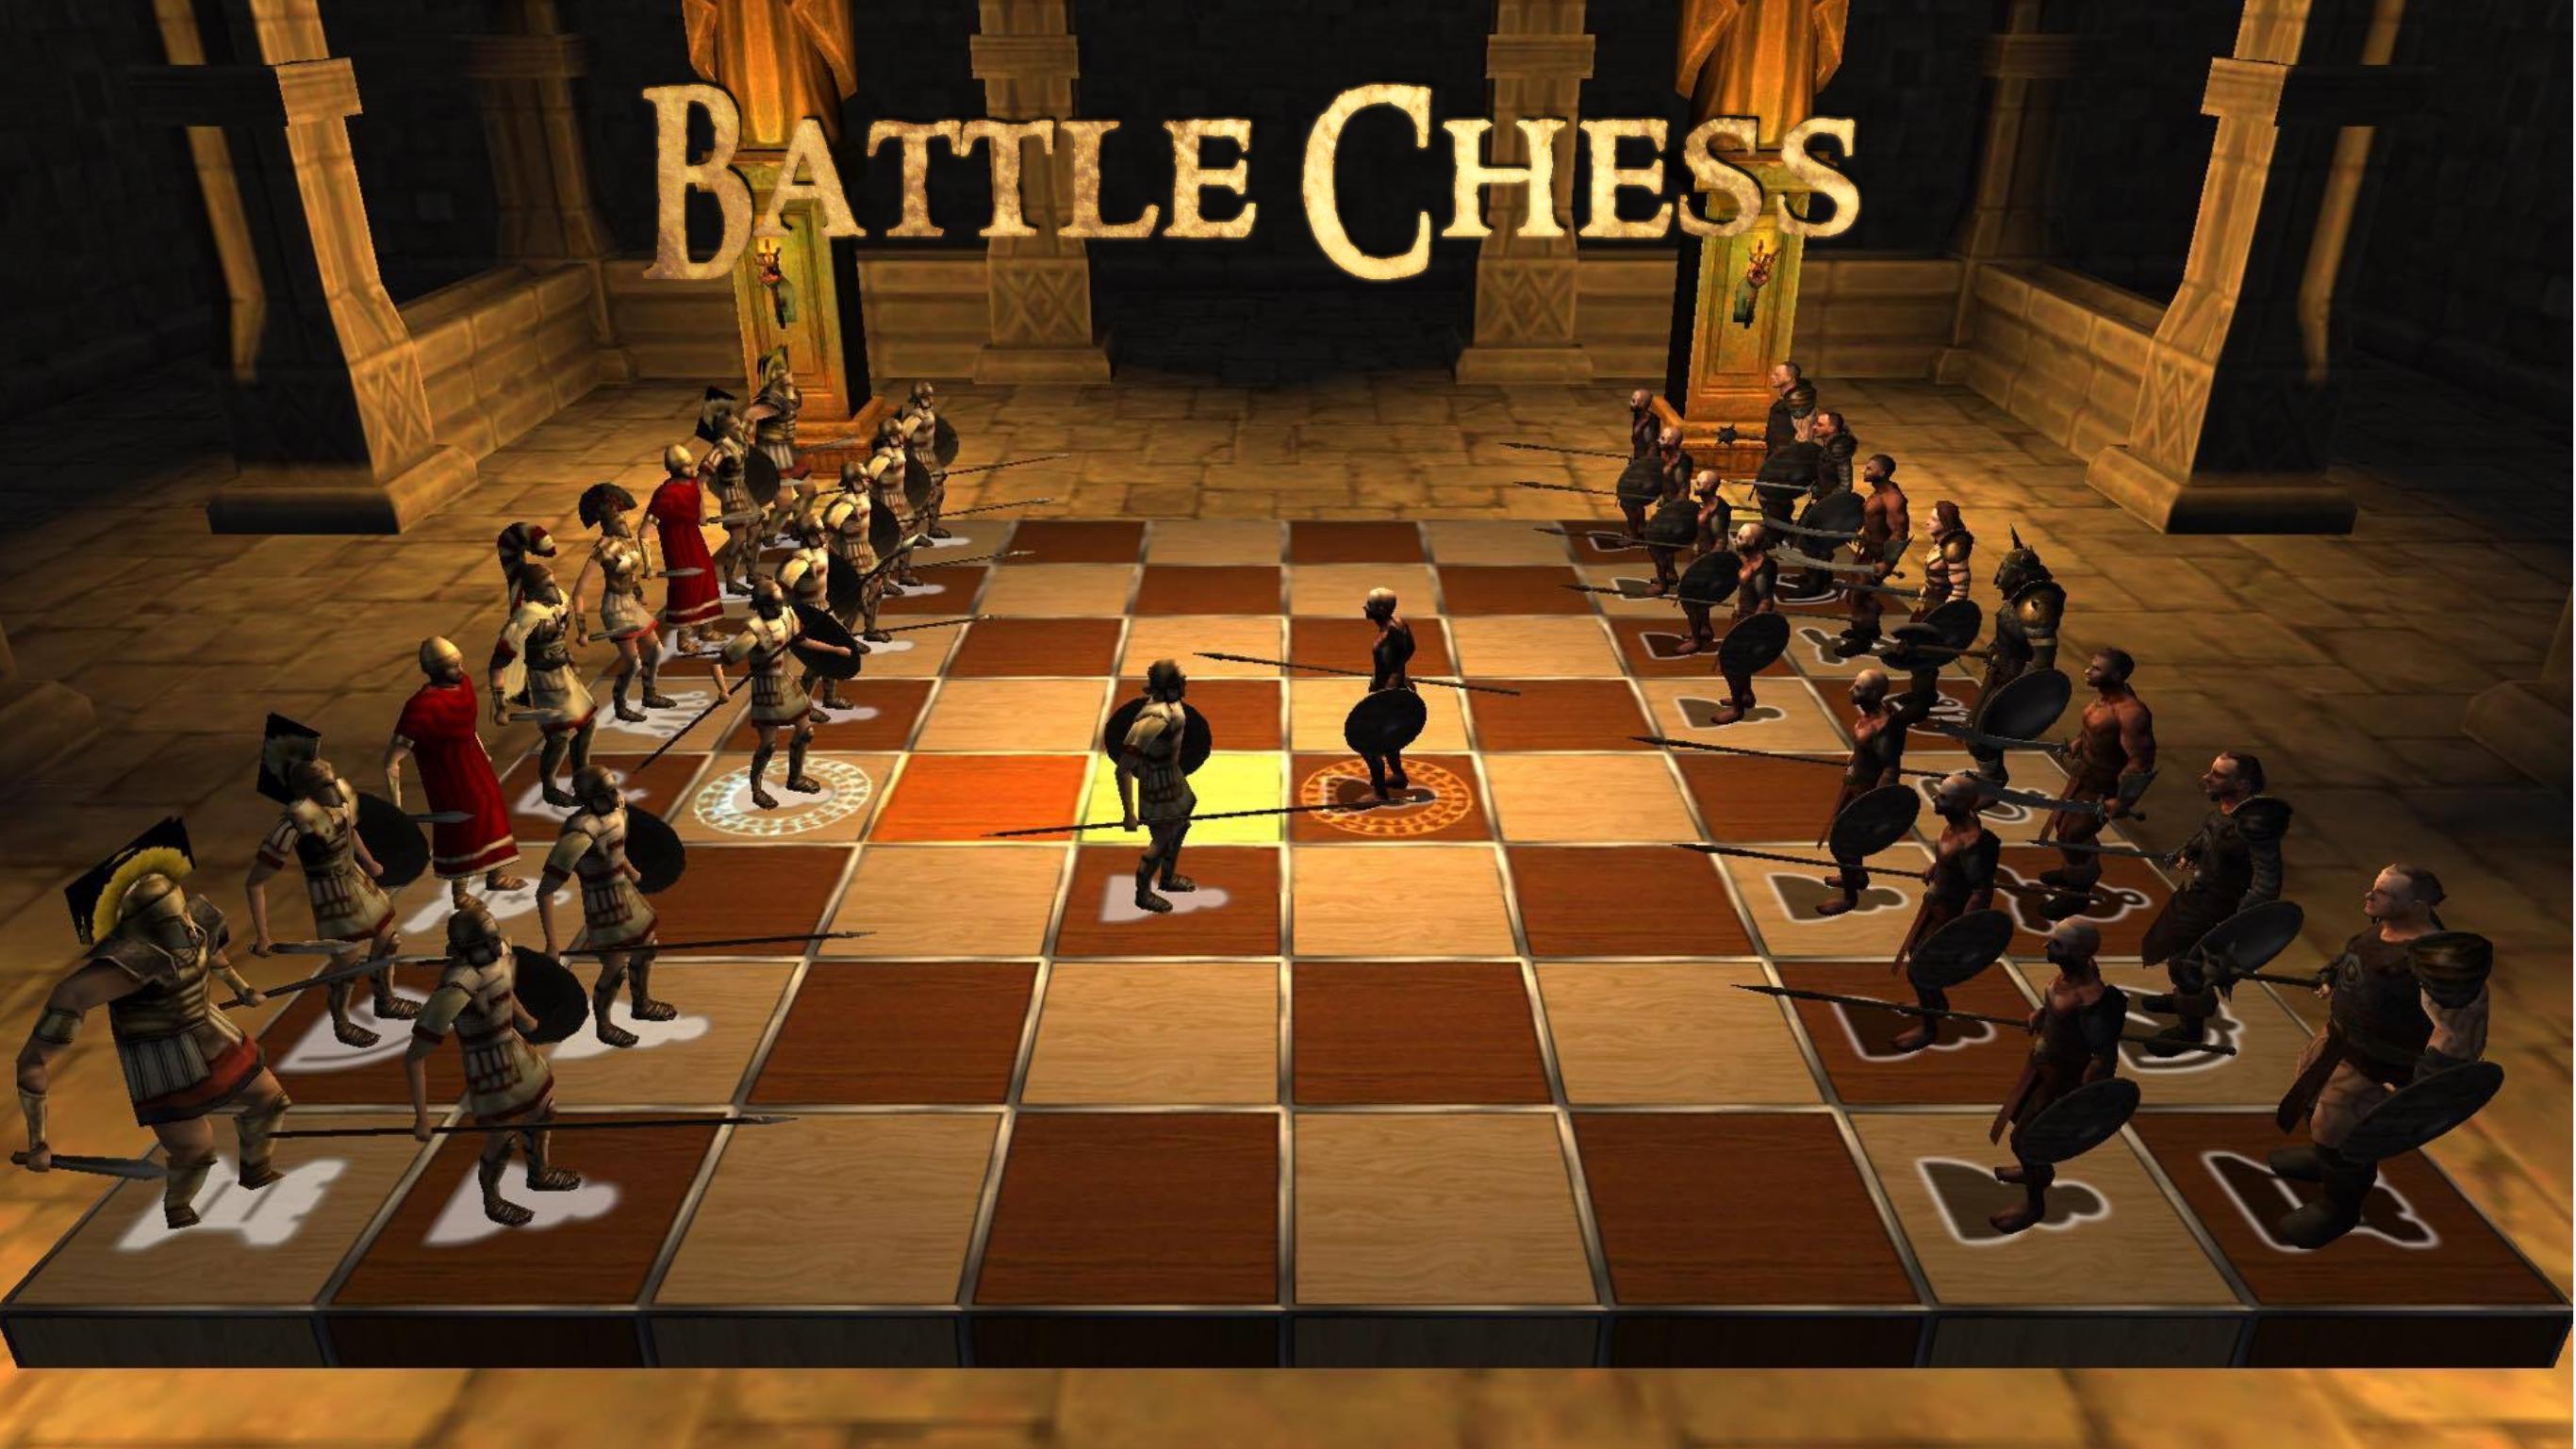 3d war chess game download for windows 10 game for dsi download